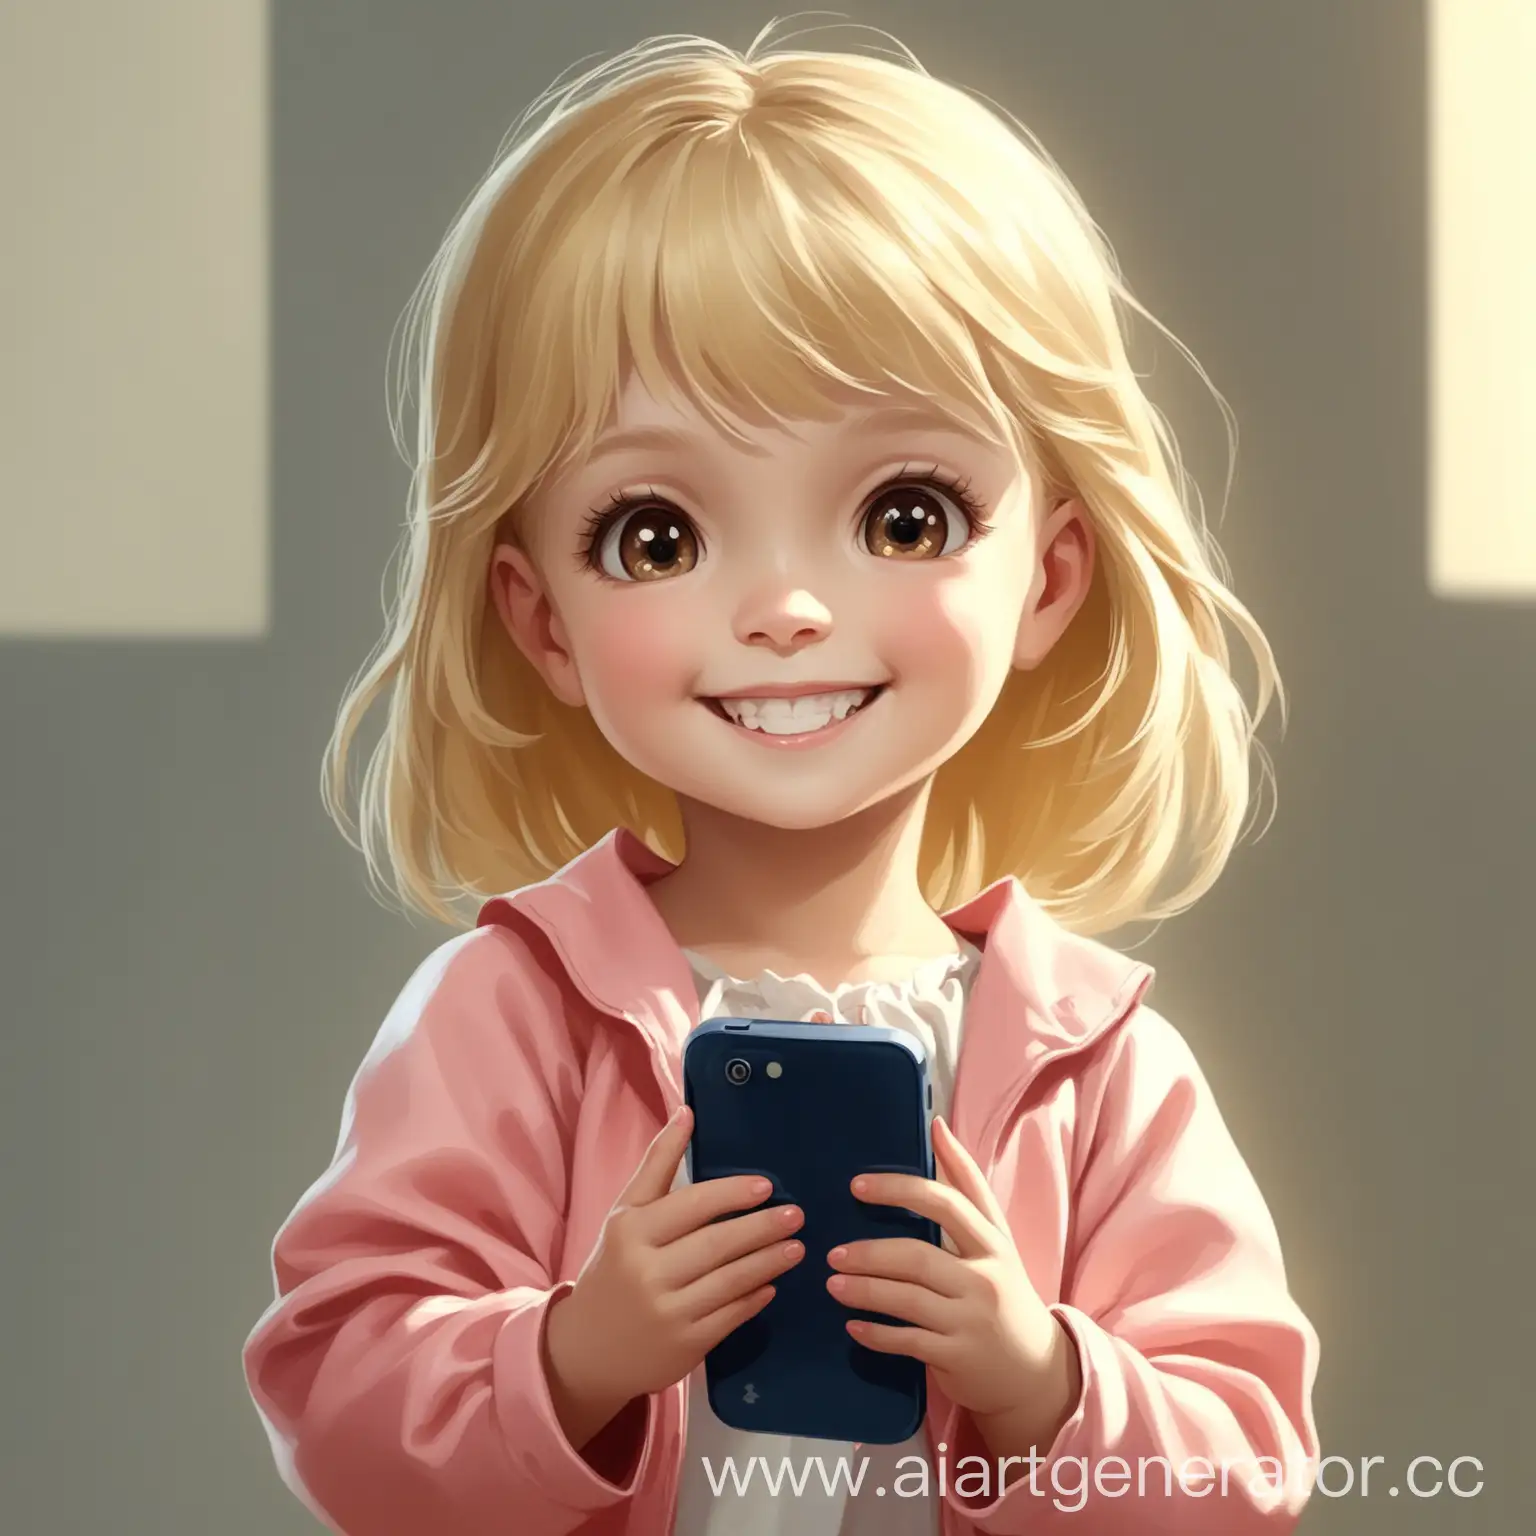 Blonde-Girl-Smiling-with-Phone